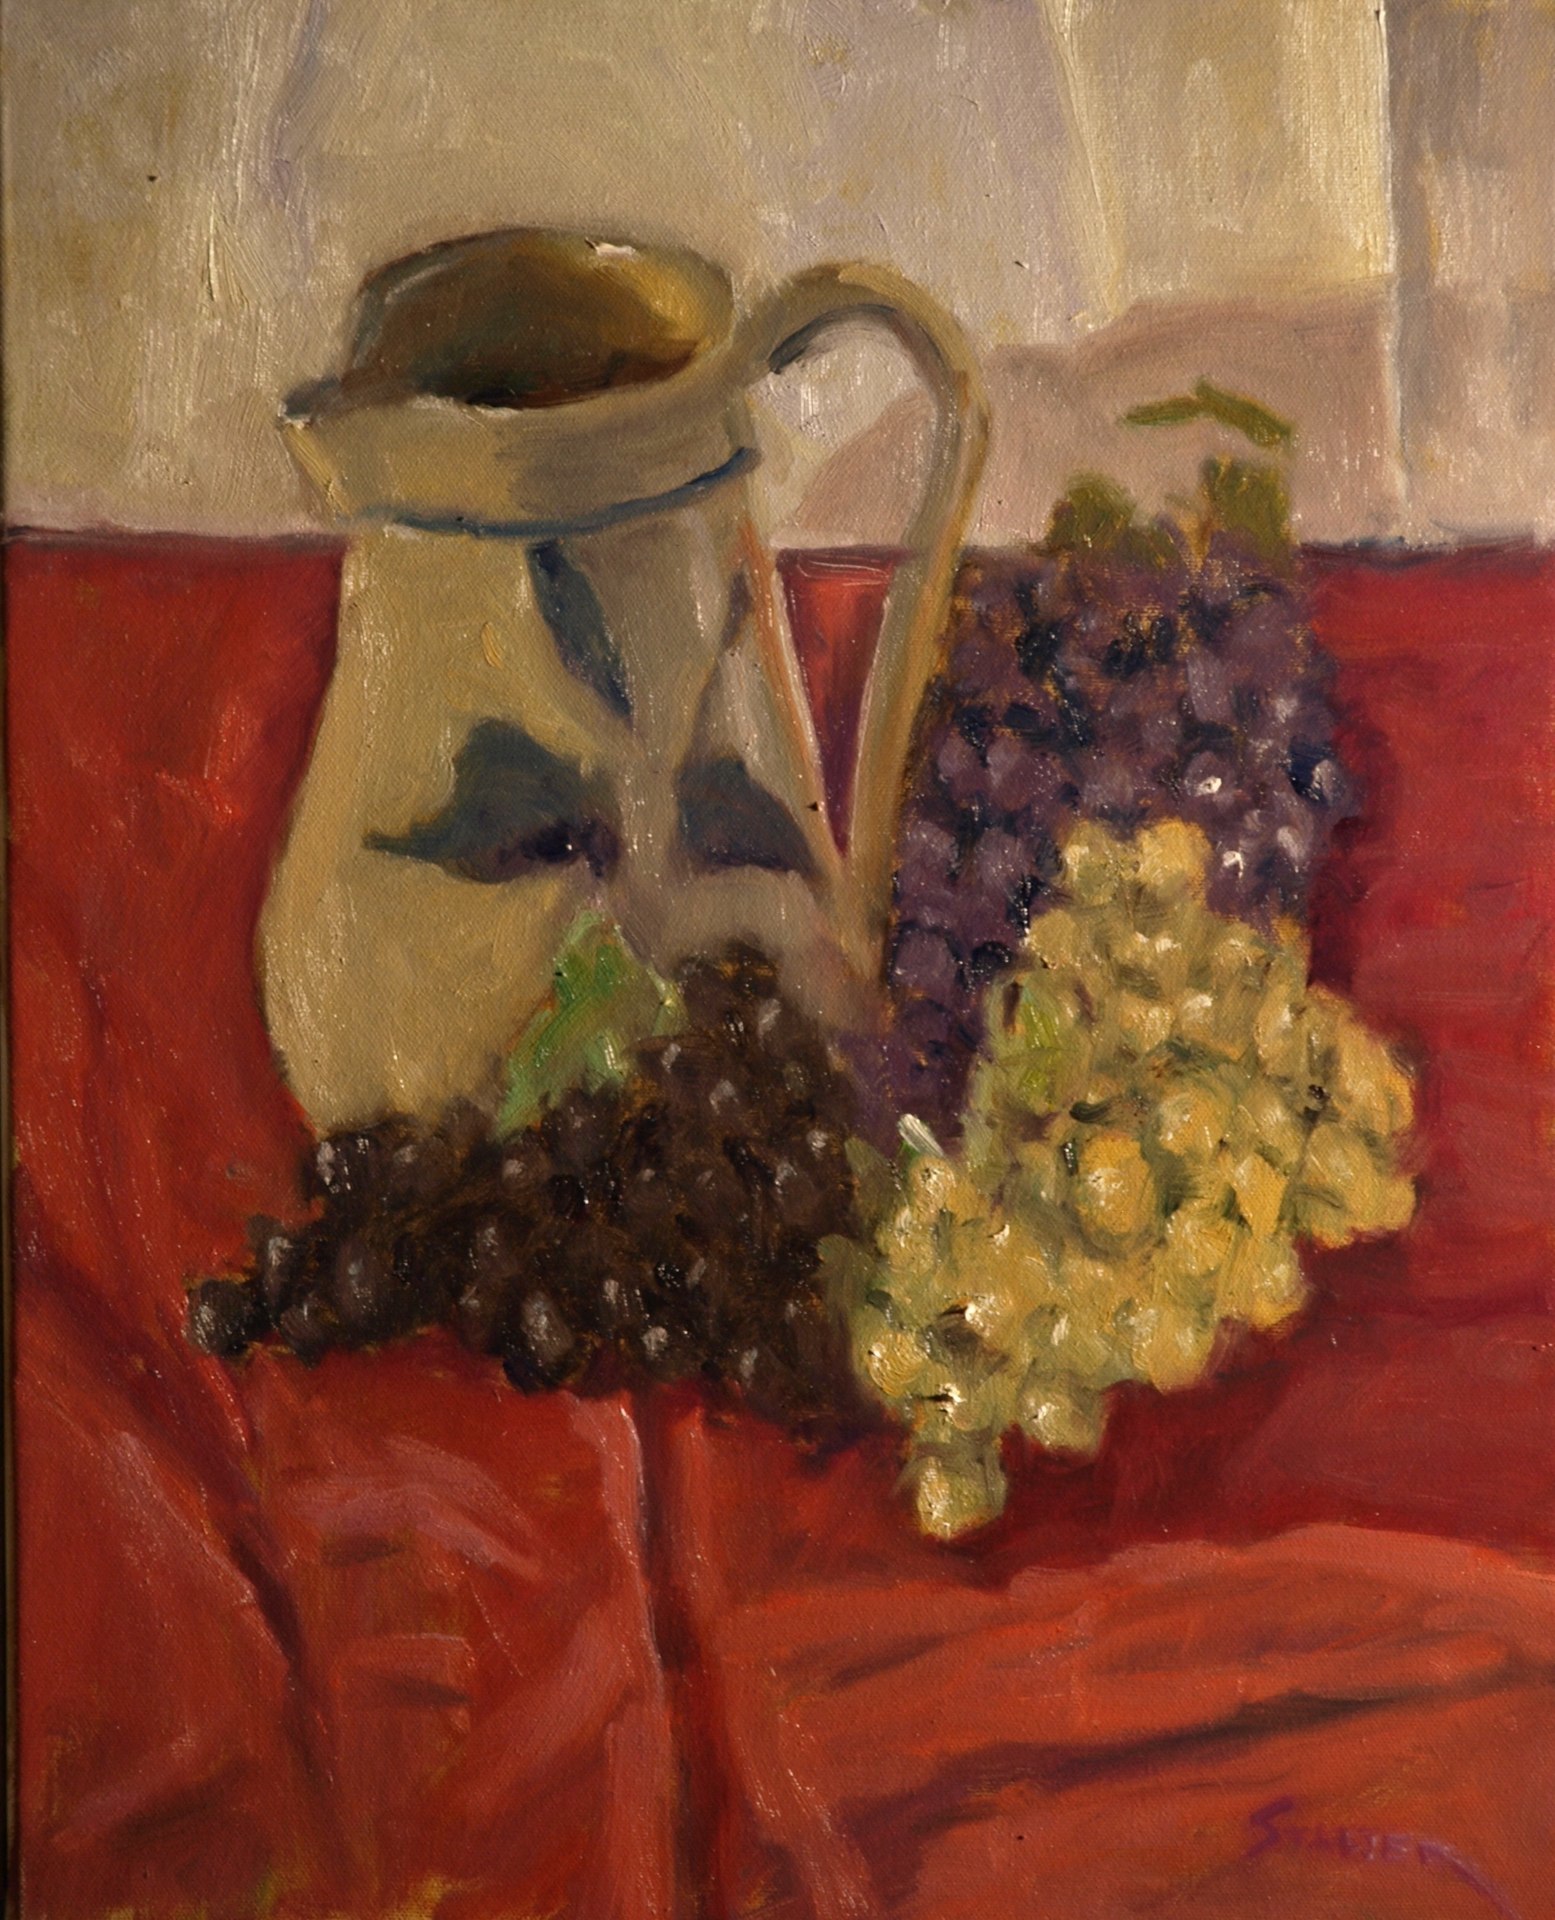 Pitcher and Grapes, Oil on Canvas, 20 x 16 Inches, by Richard Stalter, $400